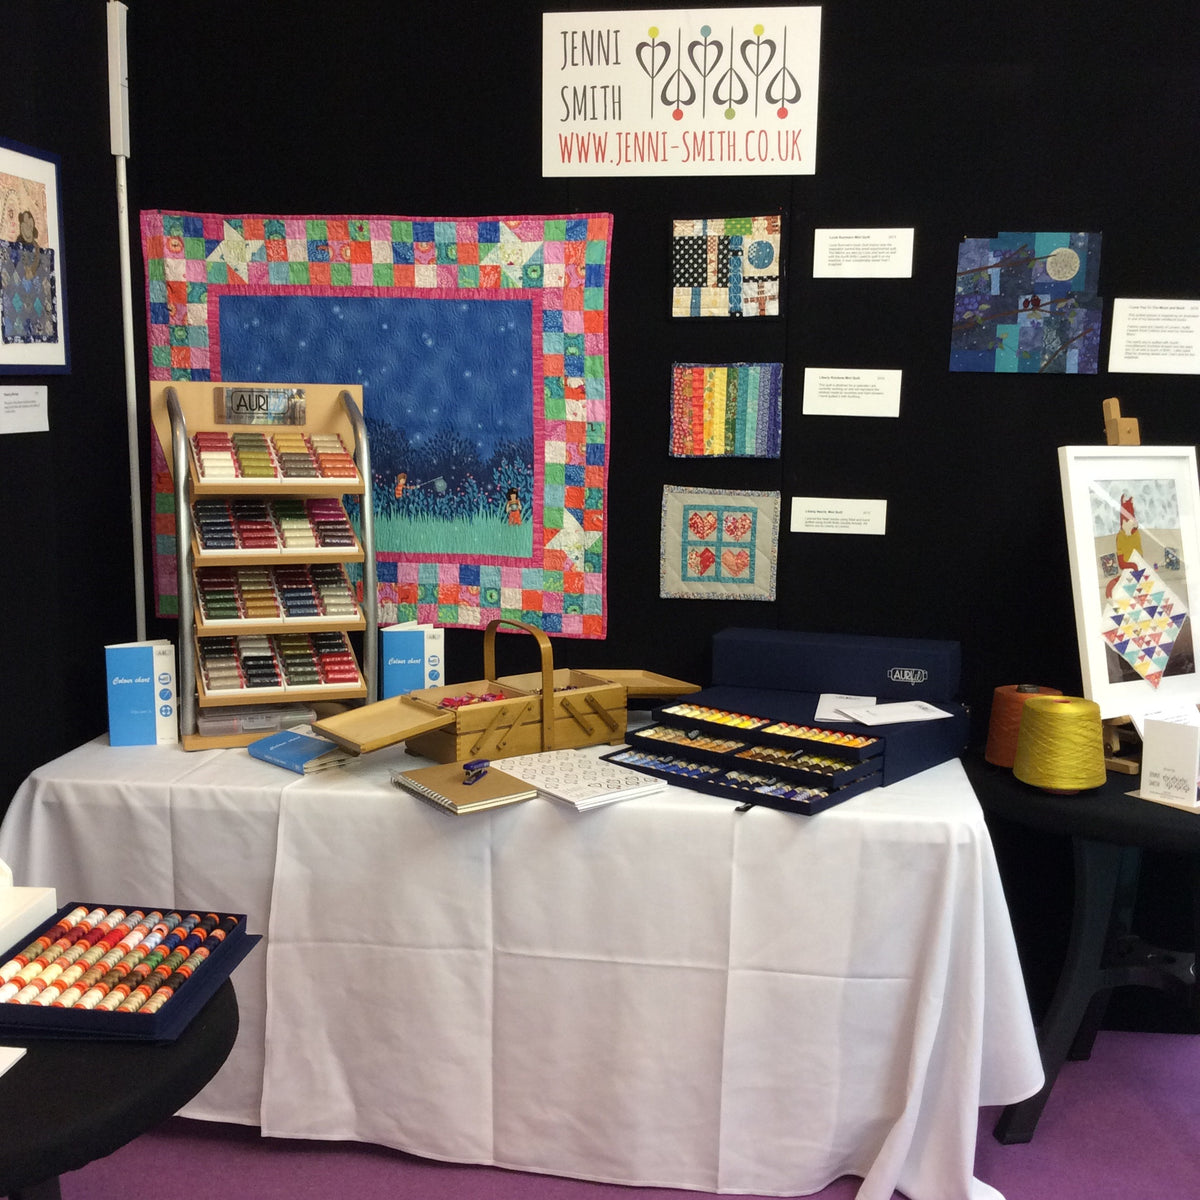 My very first trade show - Stitches 2016 with Aurifil – Jenni Smith